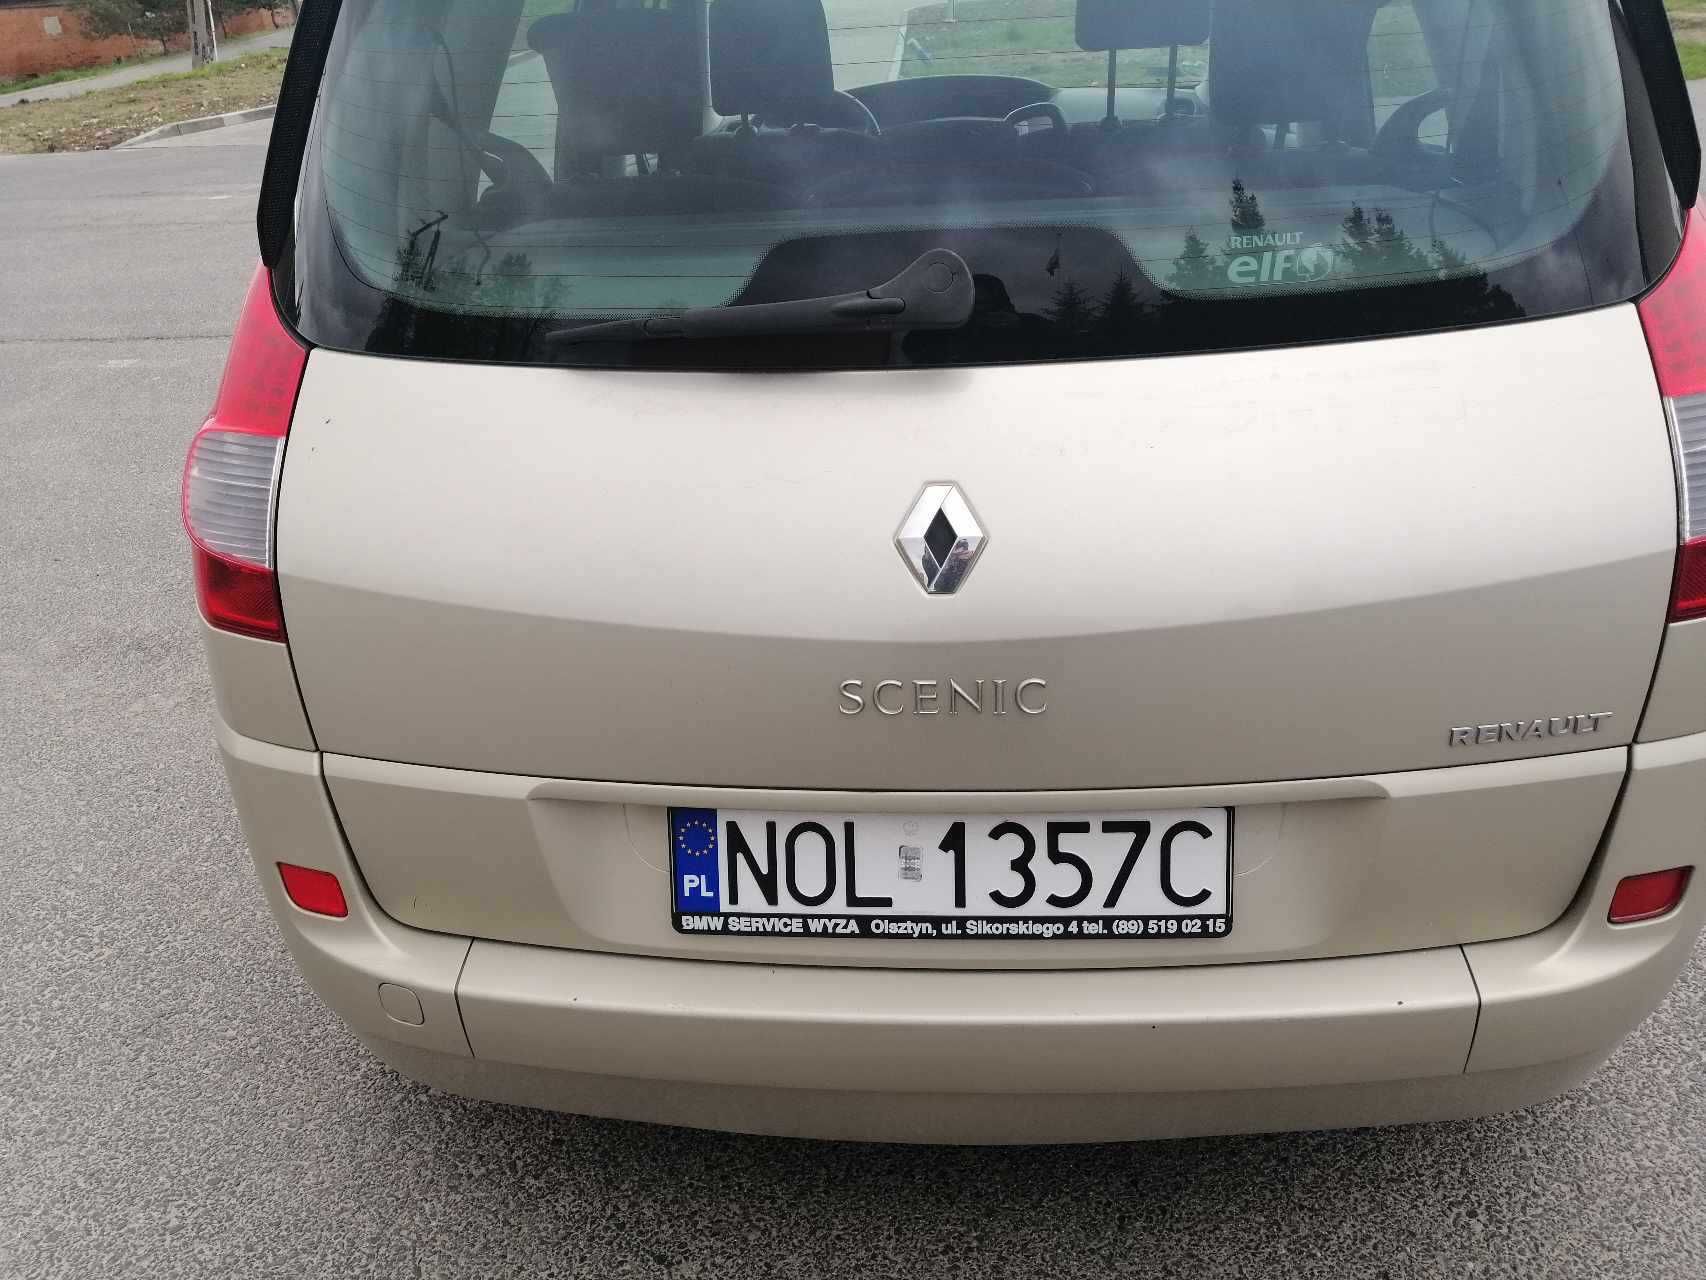 Renault Scenic II 2008r. 1.6 Benzyna